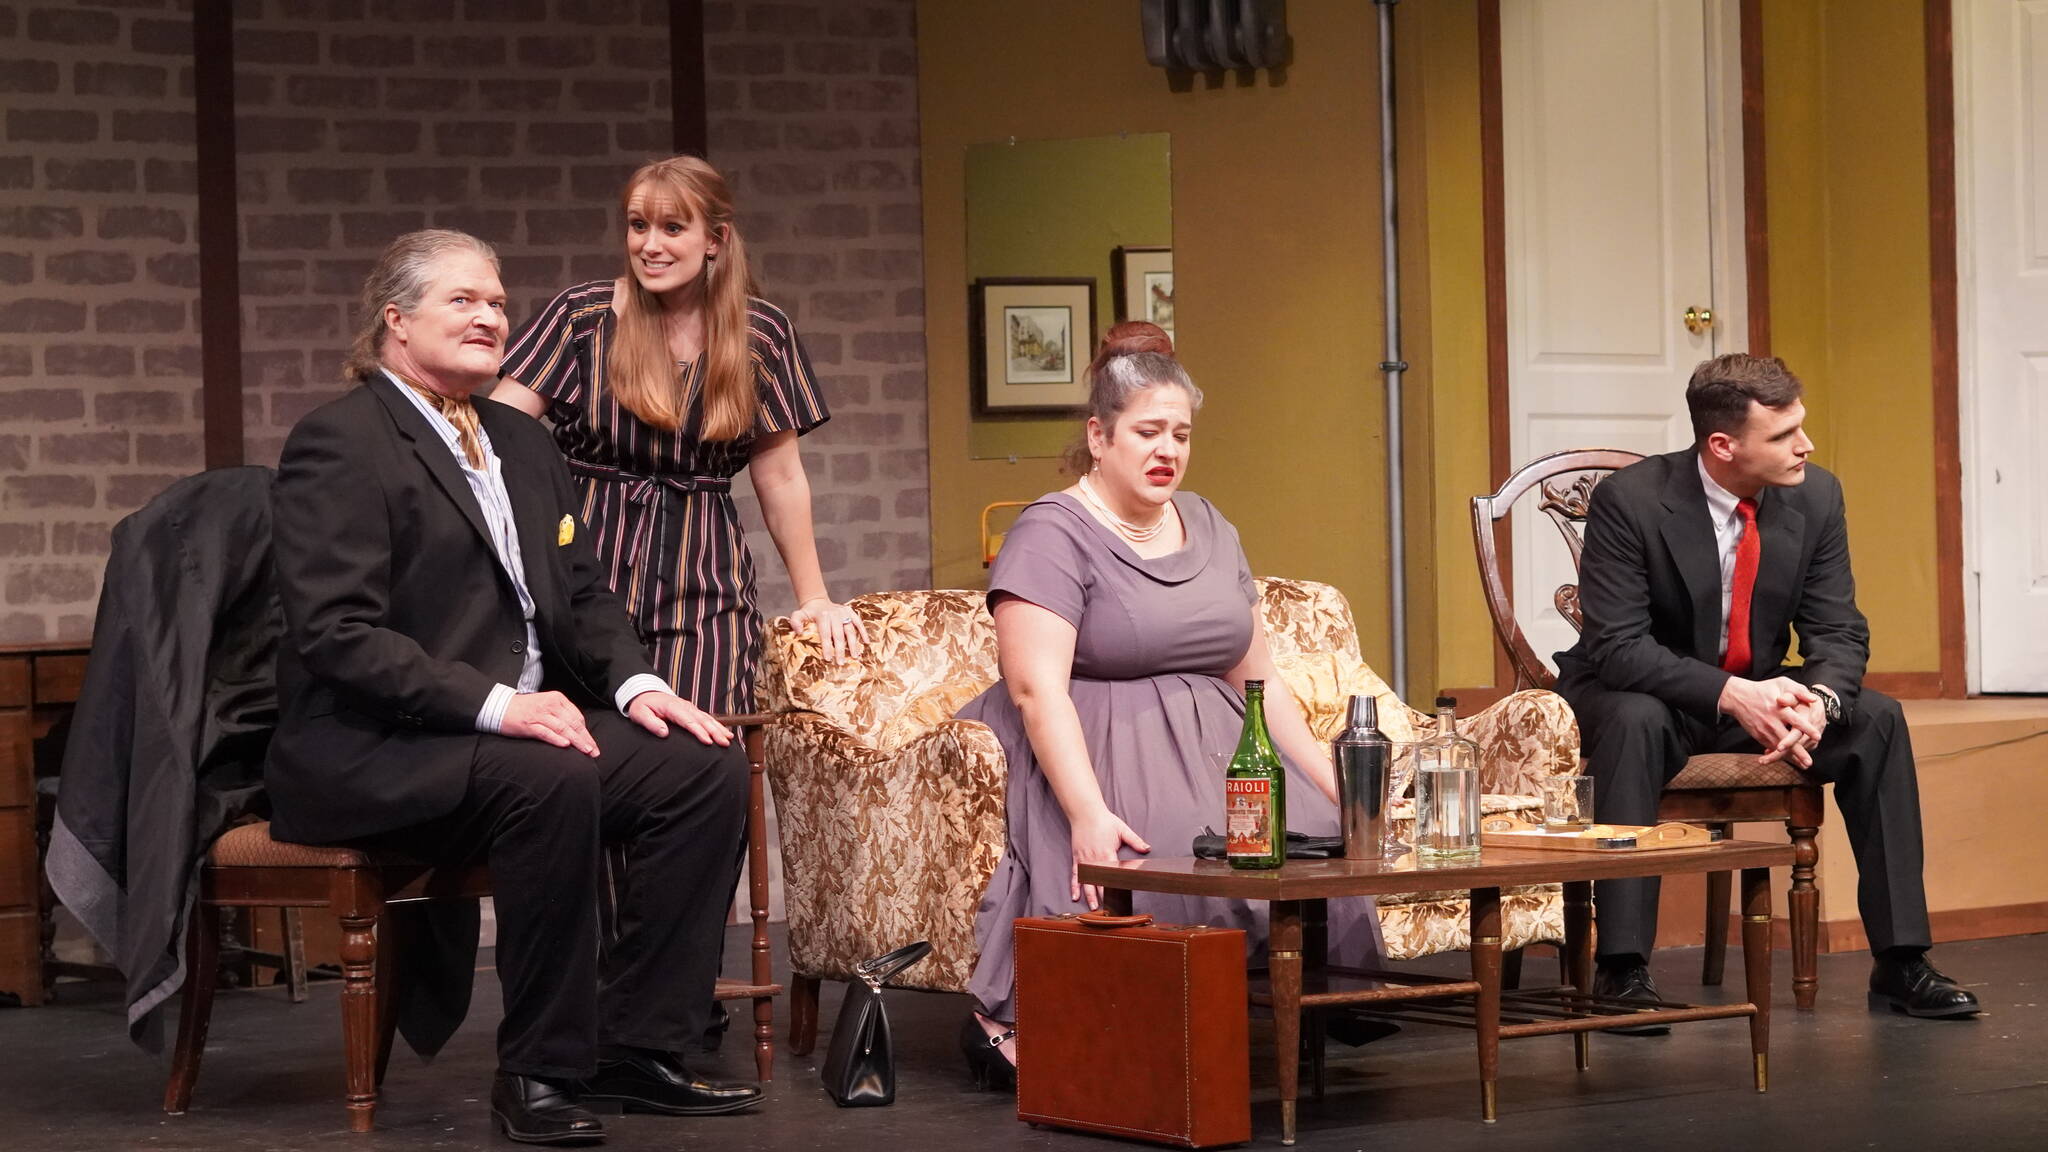 Photo by Wes Moran
From left, Steve DeHaven, Karina Andrew, Shealyn Christie and Connor Magnoli star in “Barefoot in the Park.”